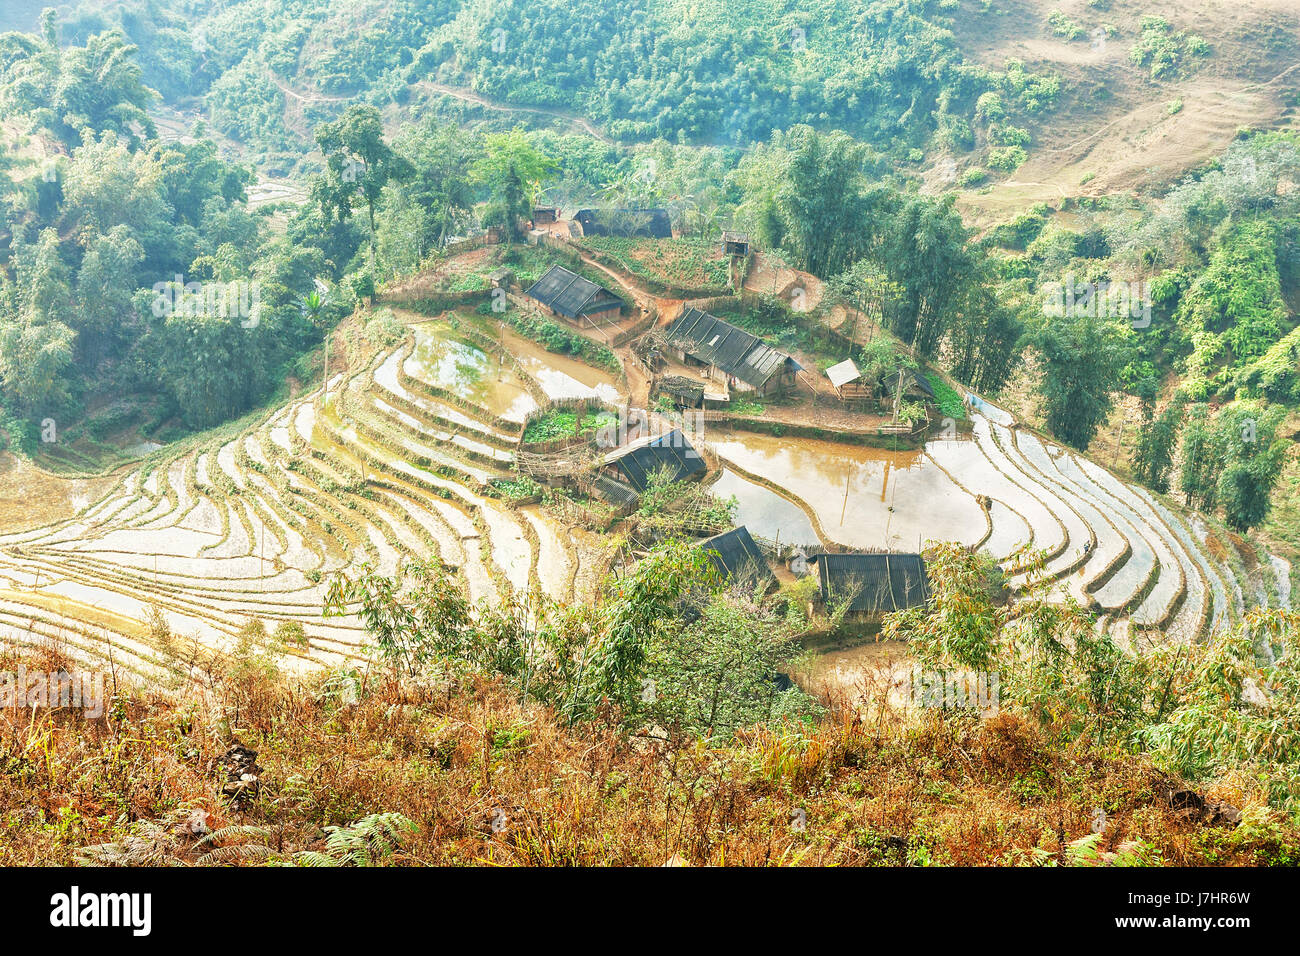 Village and rice terraces  in  northern Vietnam (near Sa Pa). Stock Photo